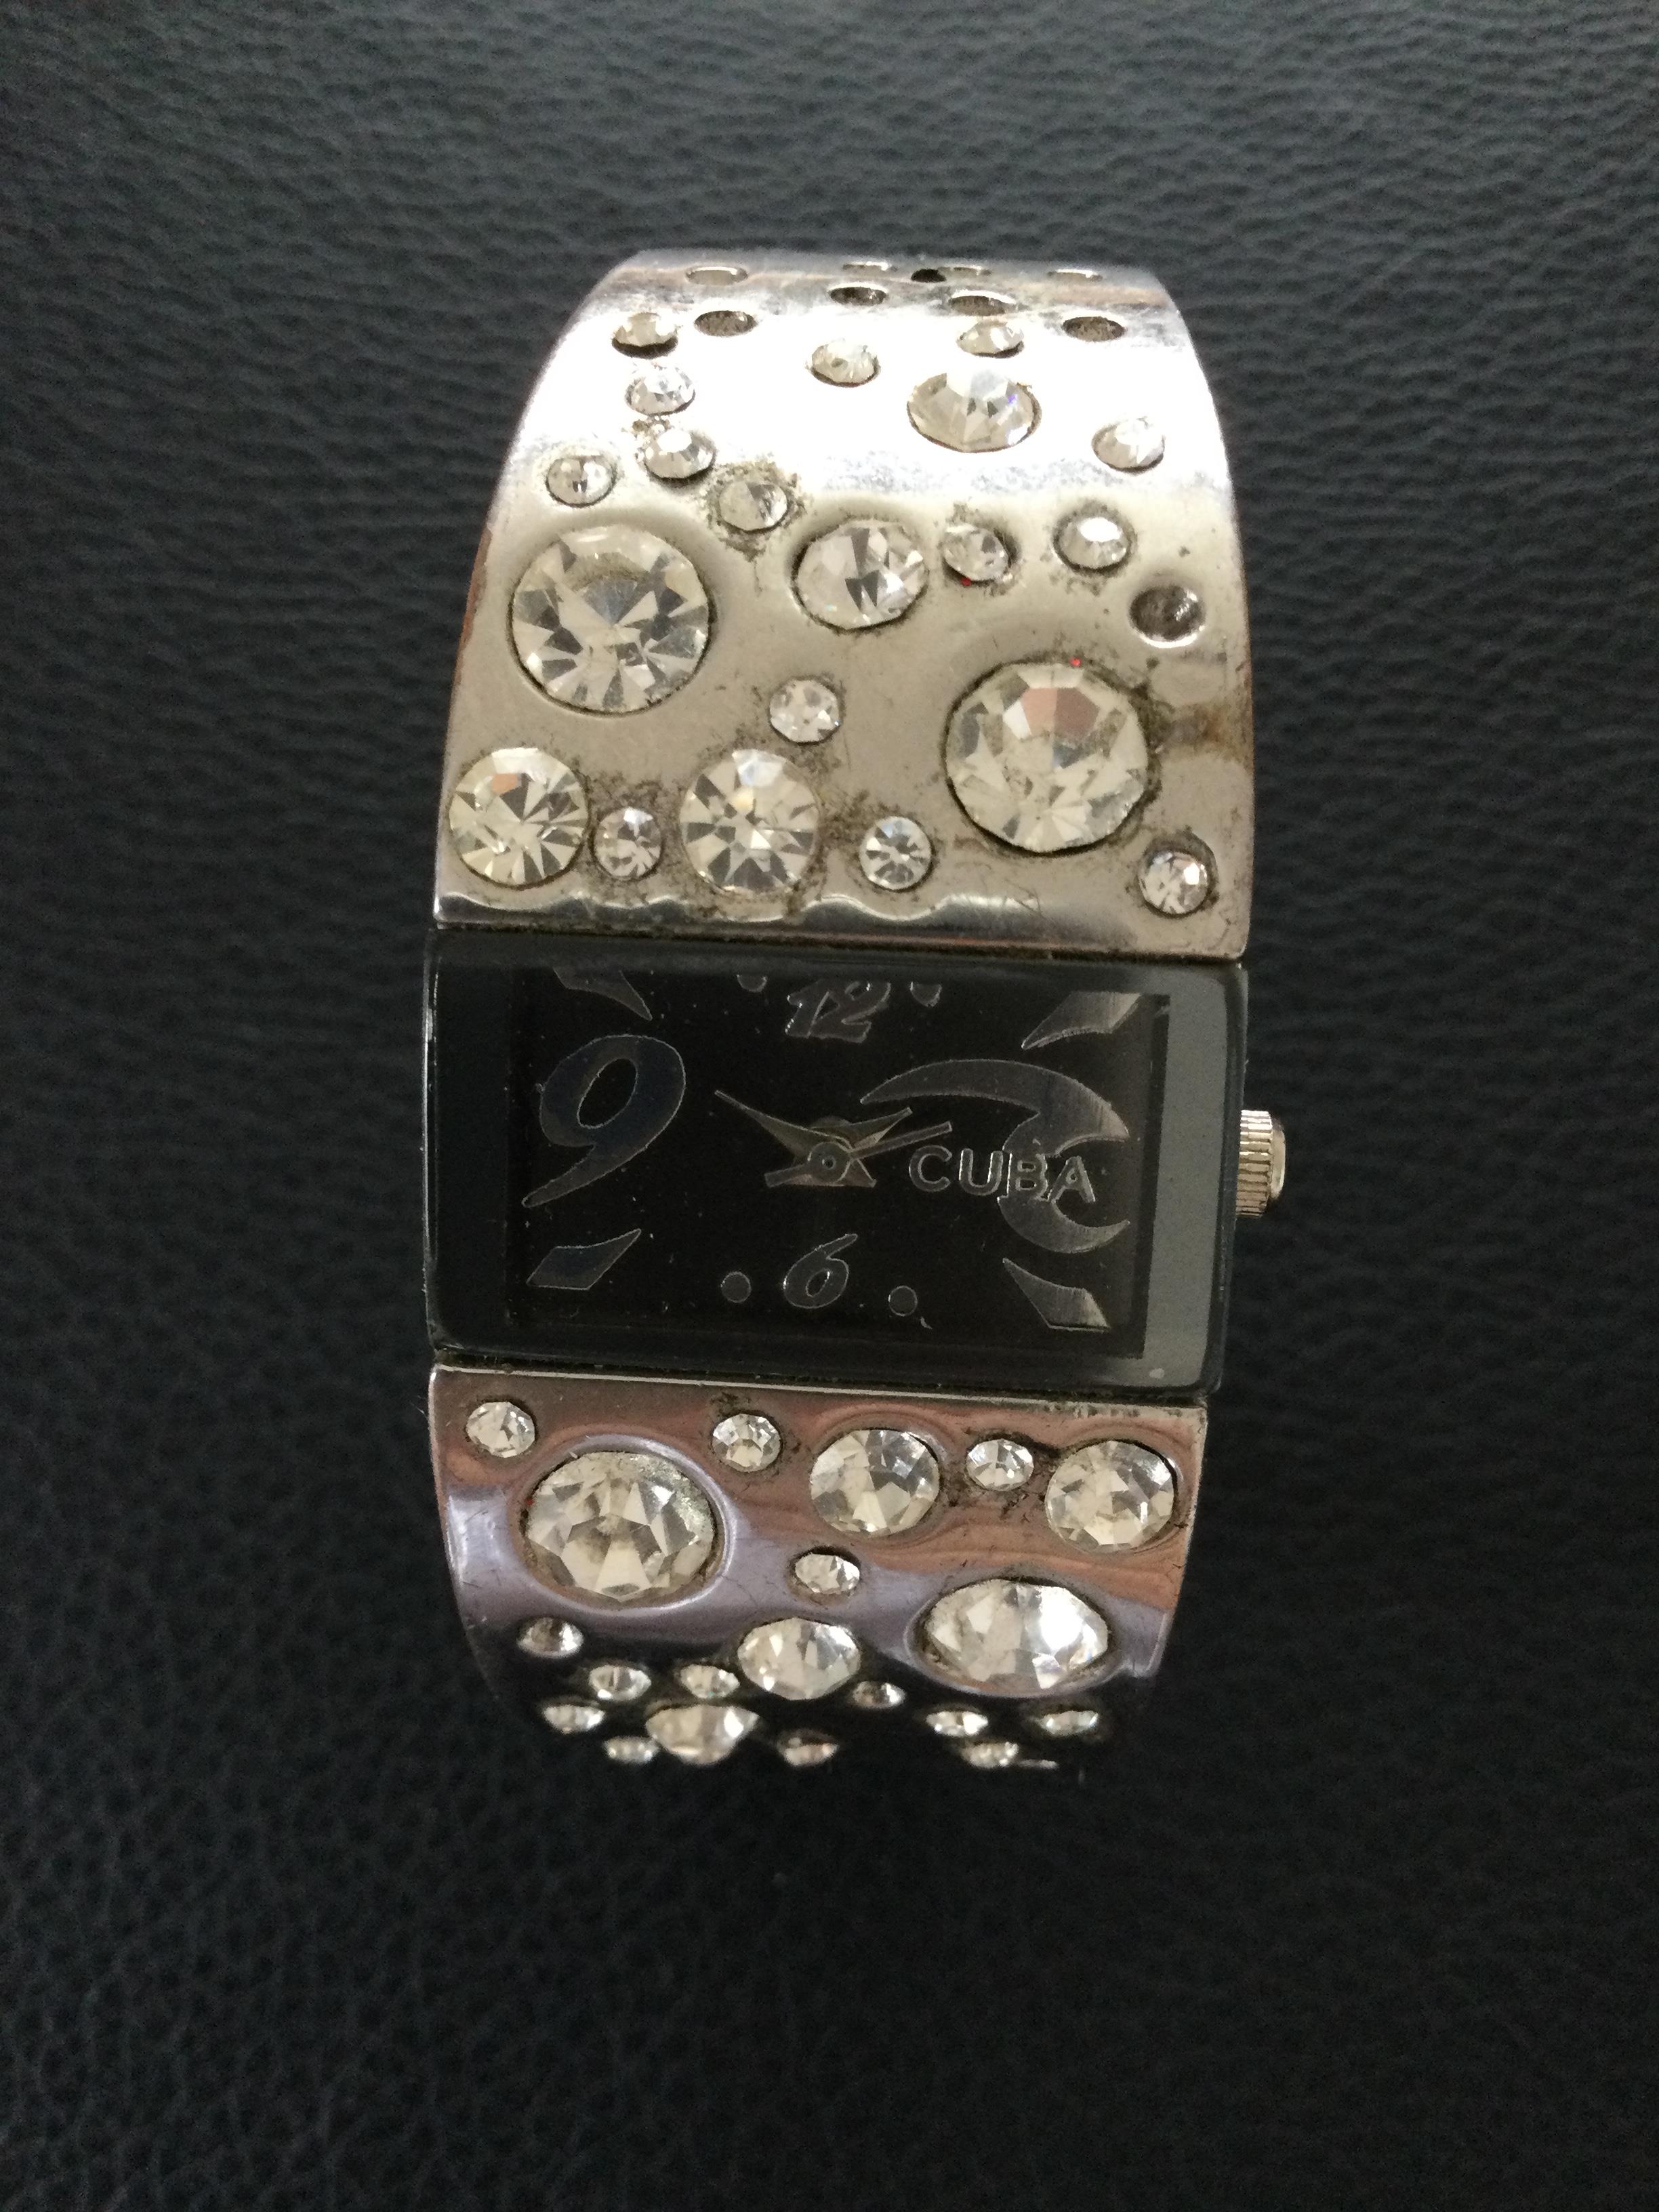 Cuba Ladies Diamante Wristwatch with Spring Adjusted Bracelet (GS 123) This is a Spring Adjusted